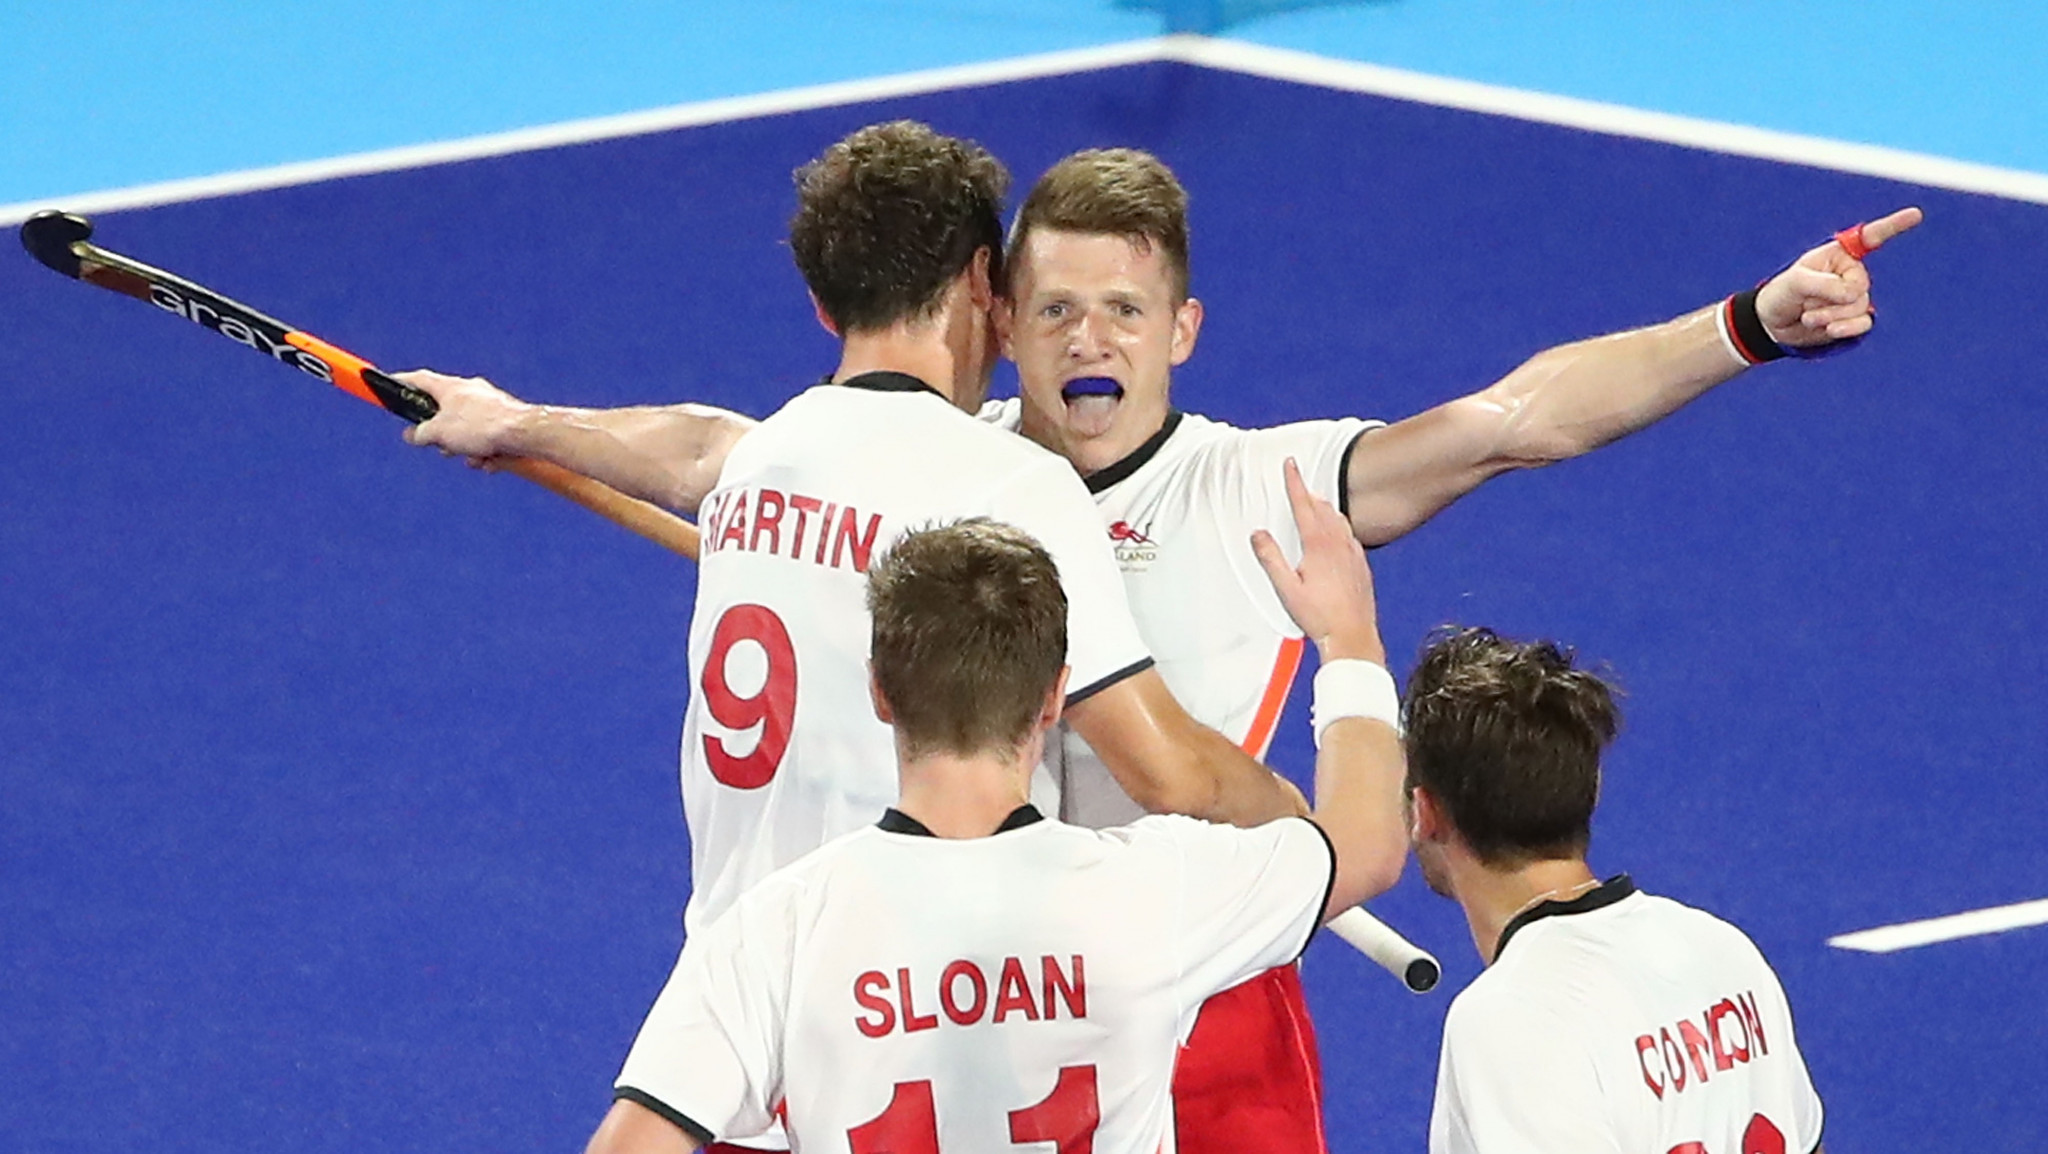 England will face India again at Birmingham 2022 after beating them for the Commonwealth Games bronze medal at Gold Coast four years ago ©Getty Images